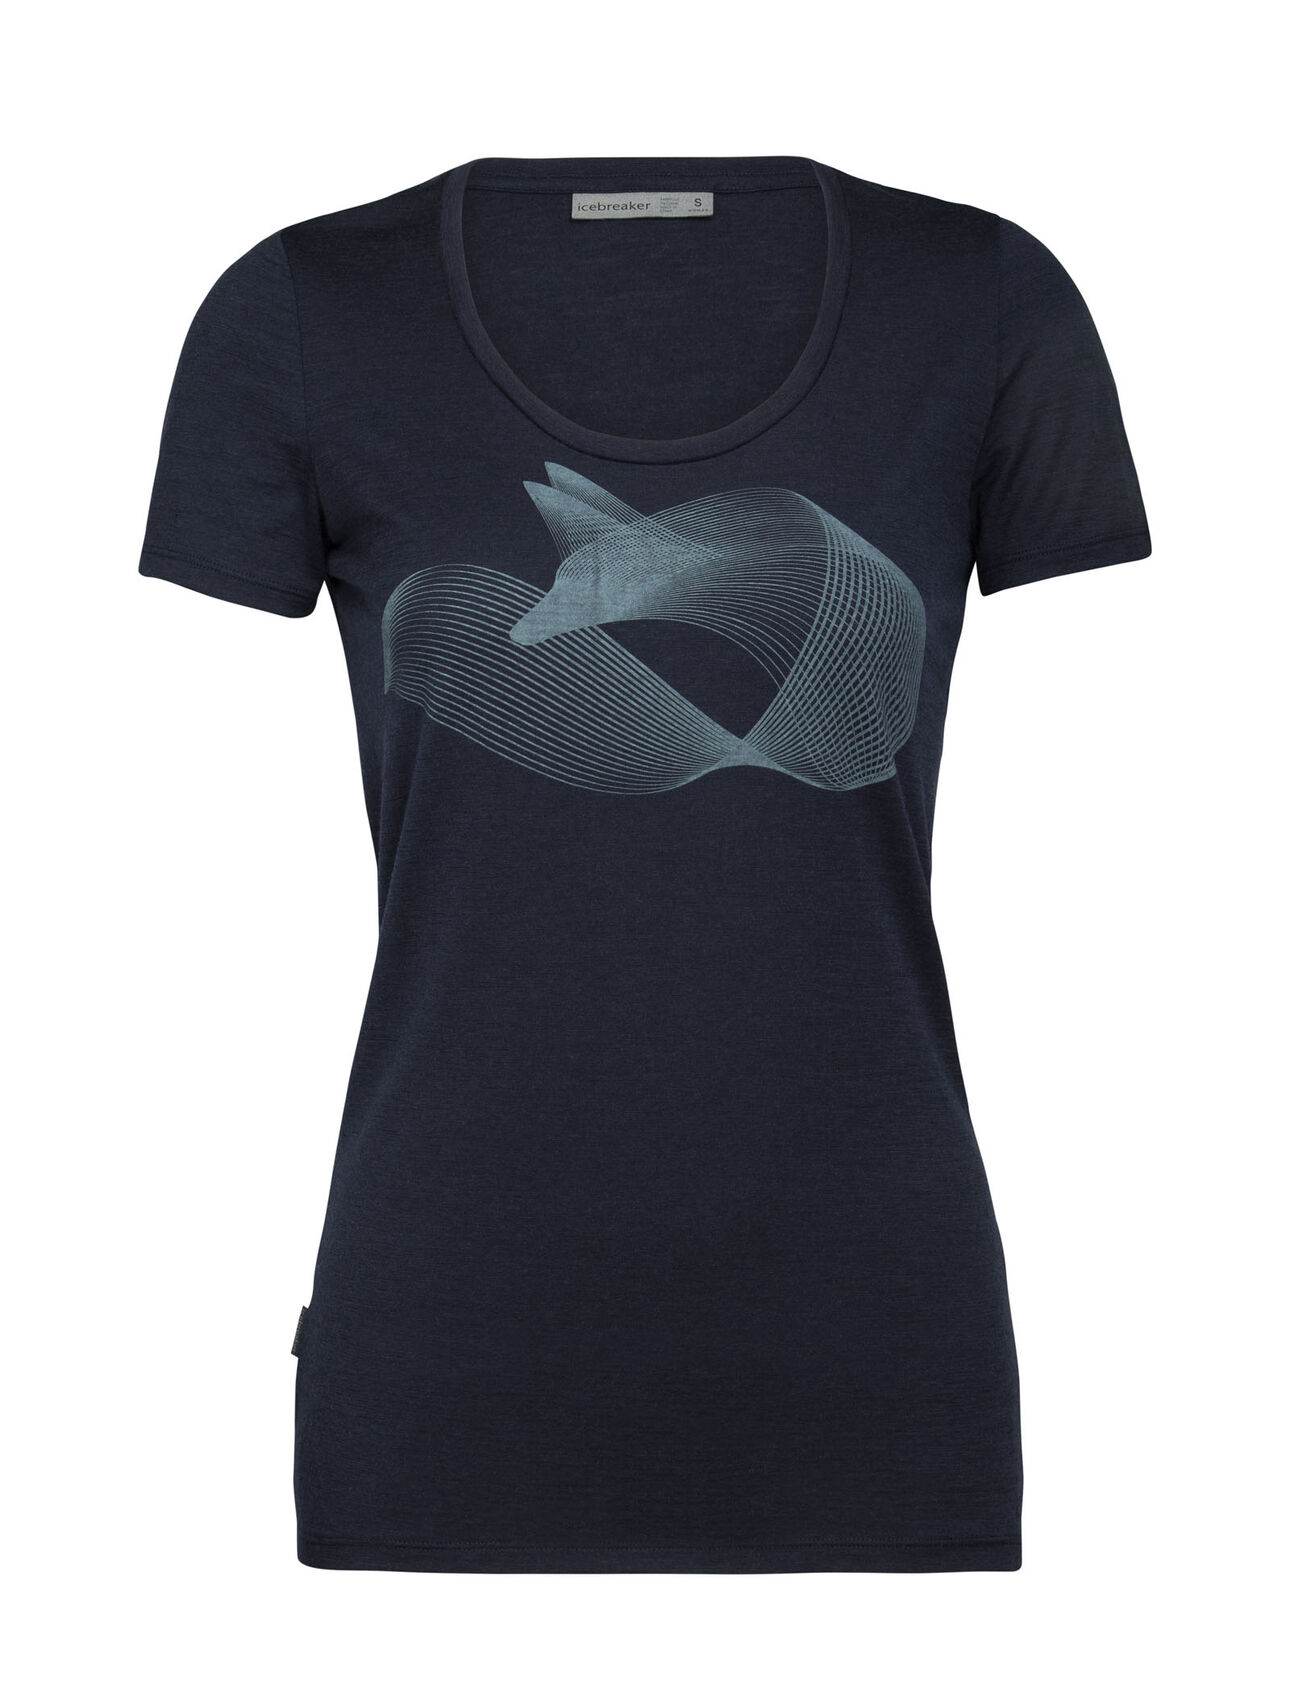 Womens Merino Tech Lite Short Sleeve Scoop Neck T-Shirt Polar Fox Our most versatile tech tee, in breathable, odor-resistant merino wool with a slight stretch and a feminine scoop neck. Artist Andrea Minini creates a beautiful, ﬂowing rendition of the Arctic fox. 